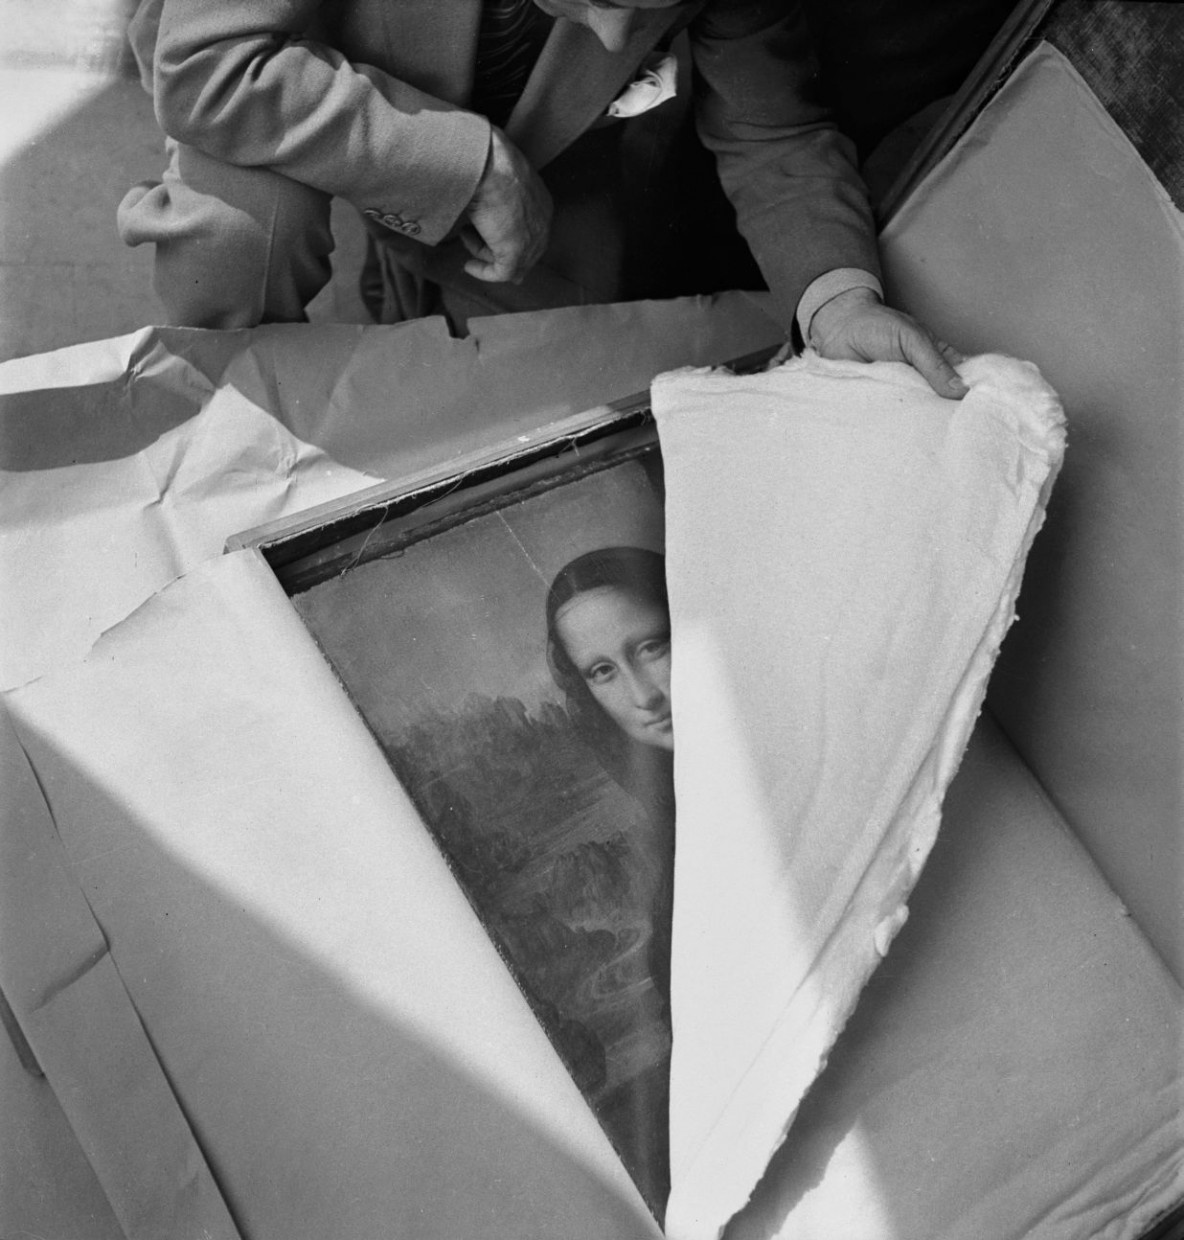 Da Vinci’s Mona Lisa is returned to the Louvre after WWII.